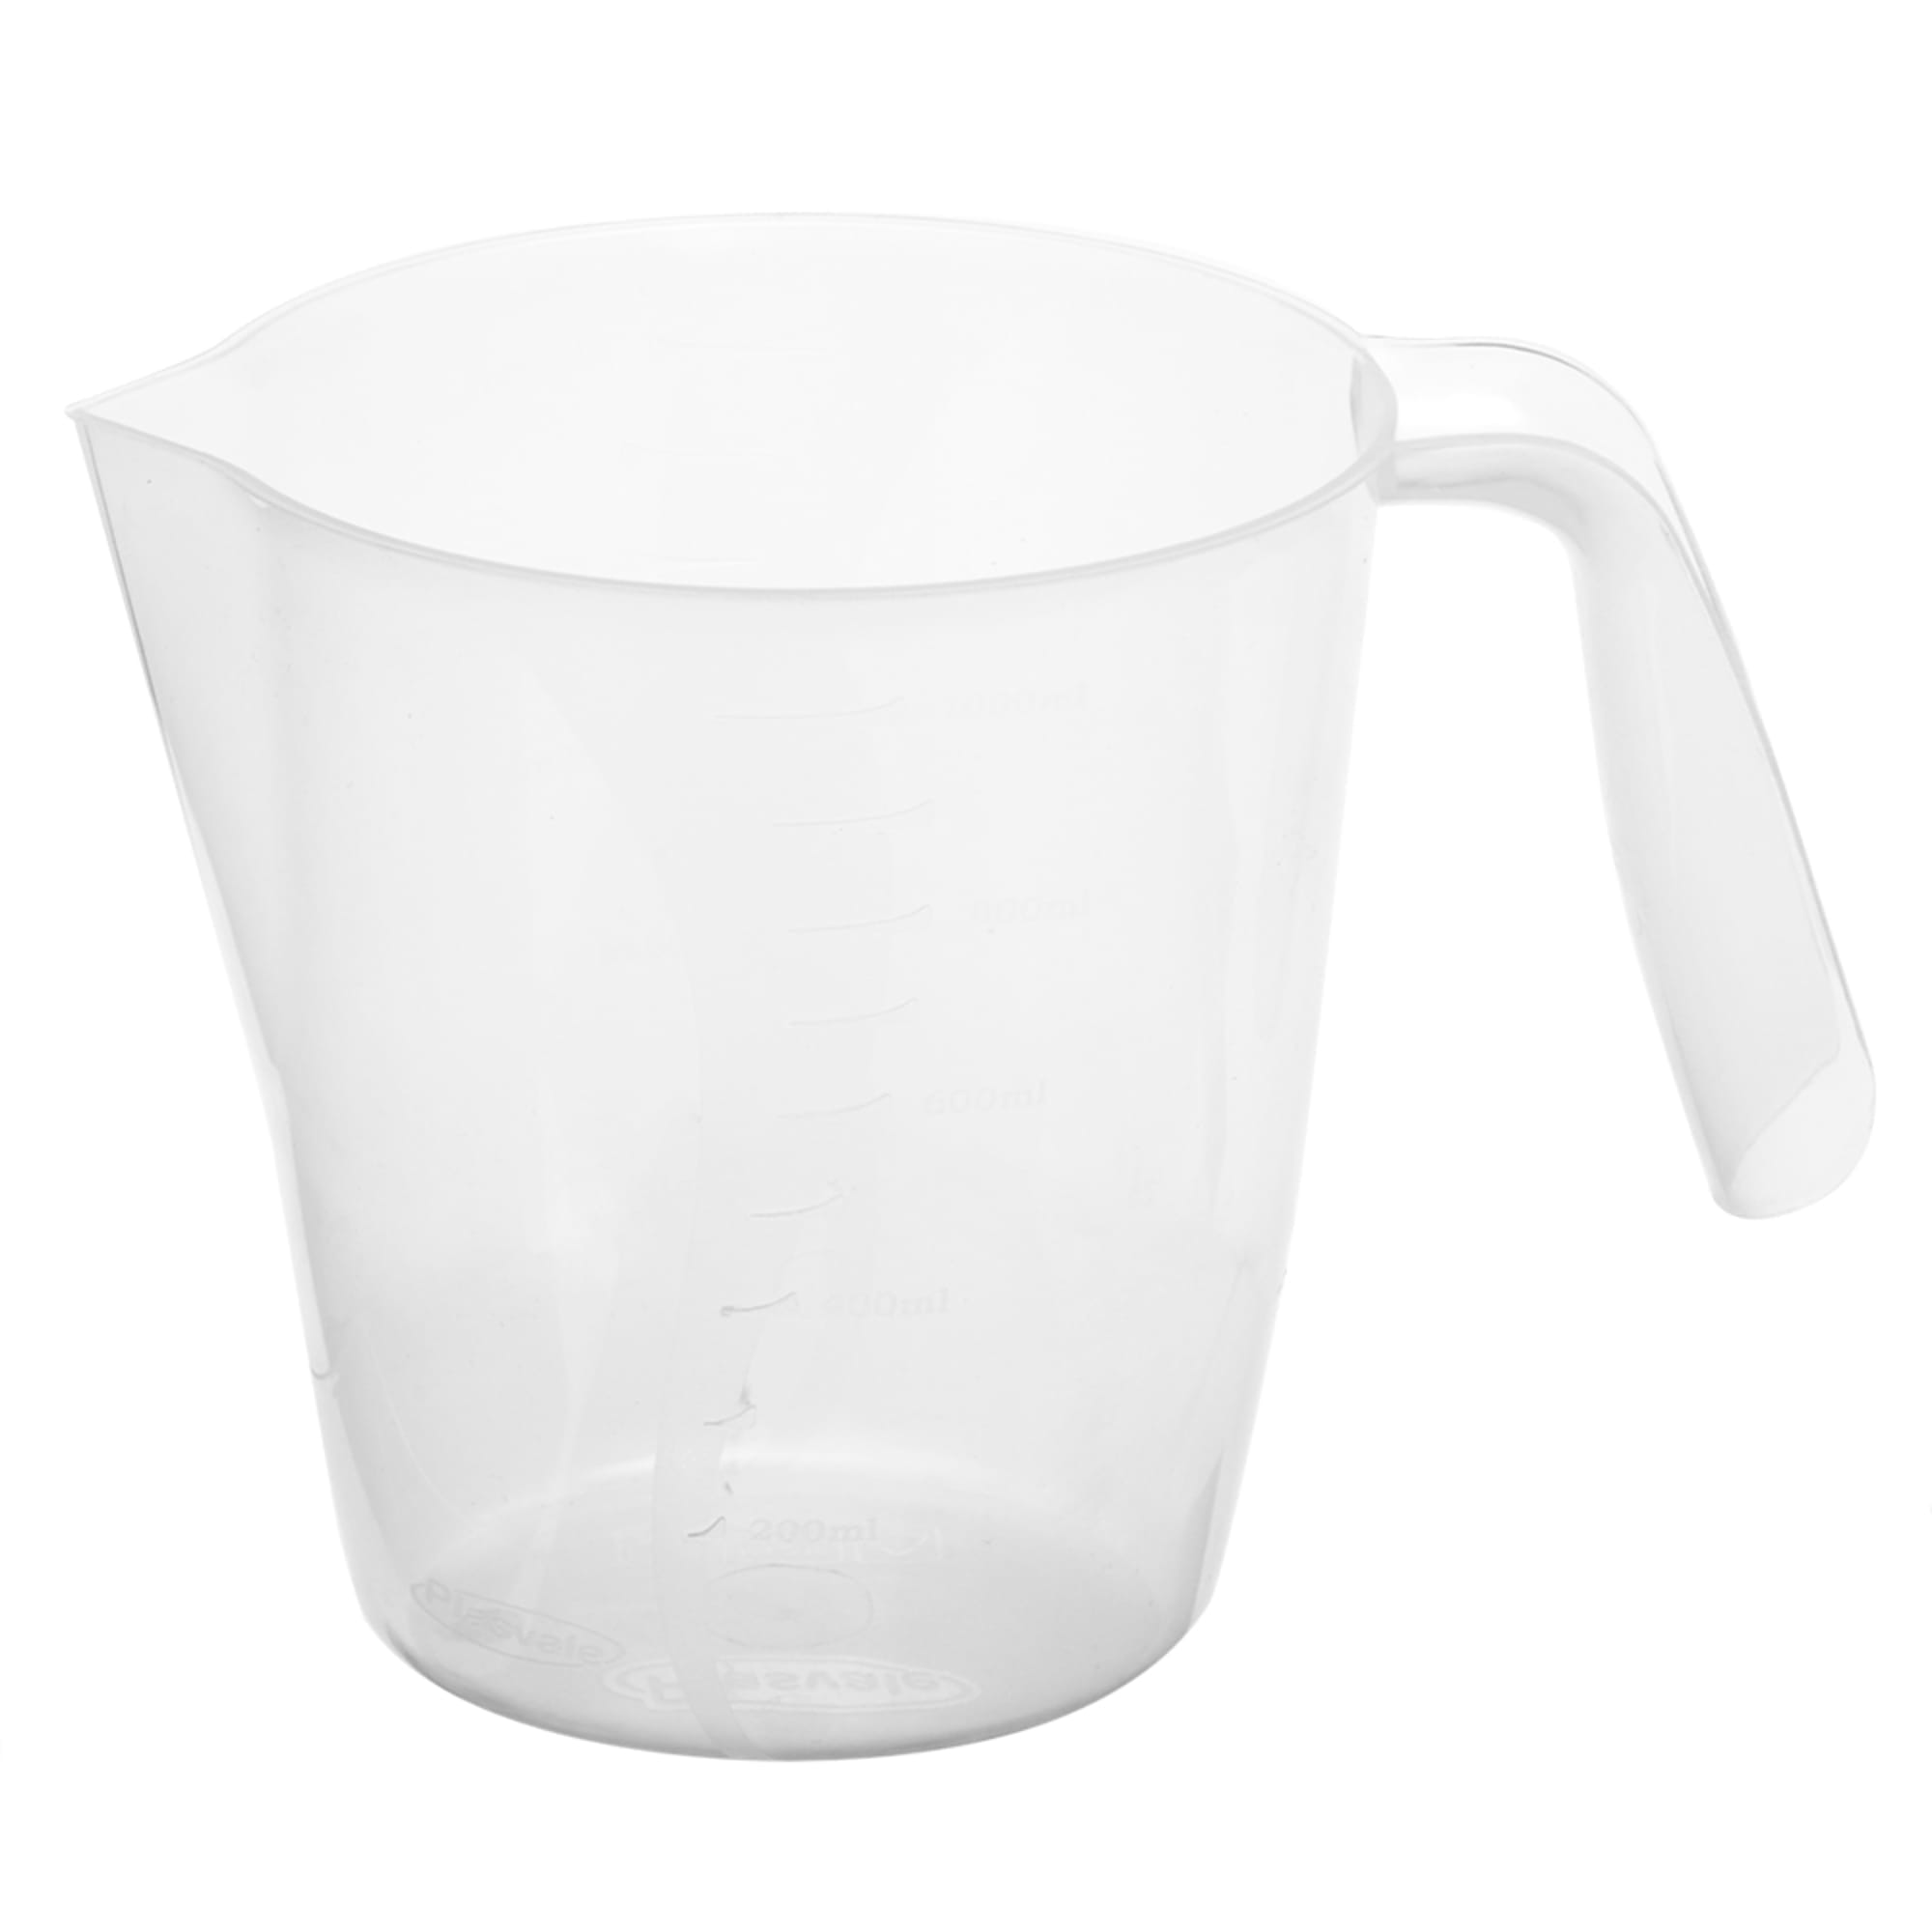 Home Basics 1000 ml Plastic Measuring Cup with Raised Measurement Markings, Clear $1.50 EACH, CASE PACK OF 24